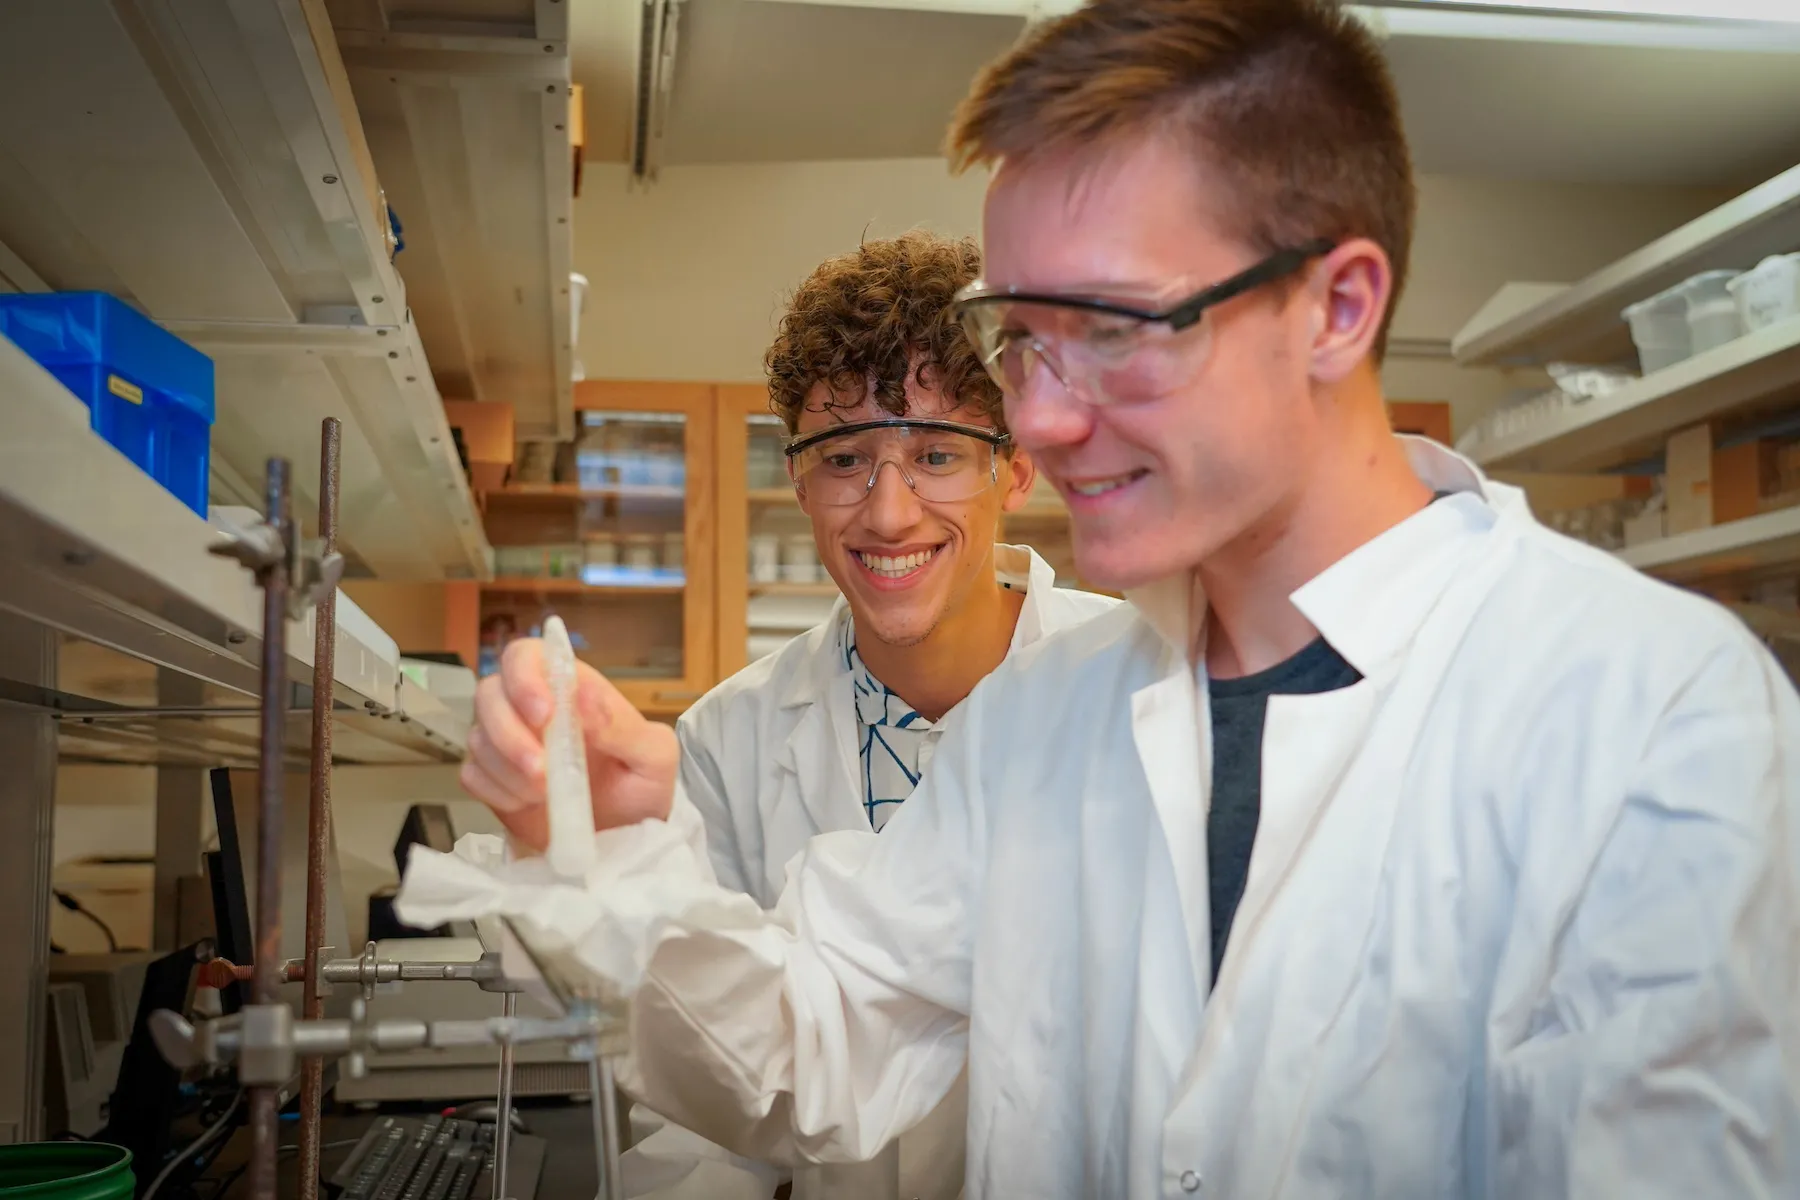 Students conduct chemistry research over summer